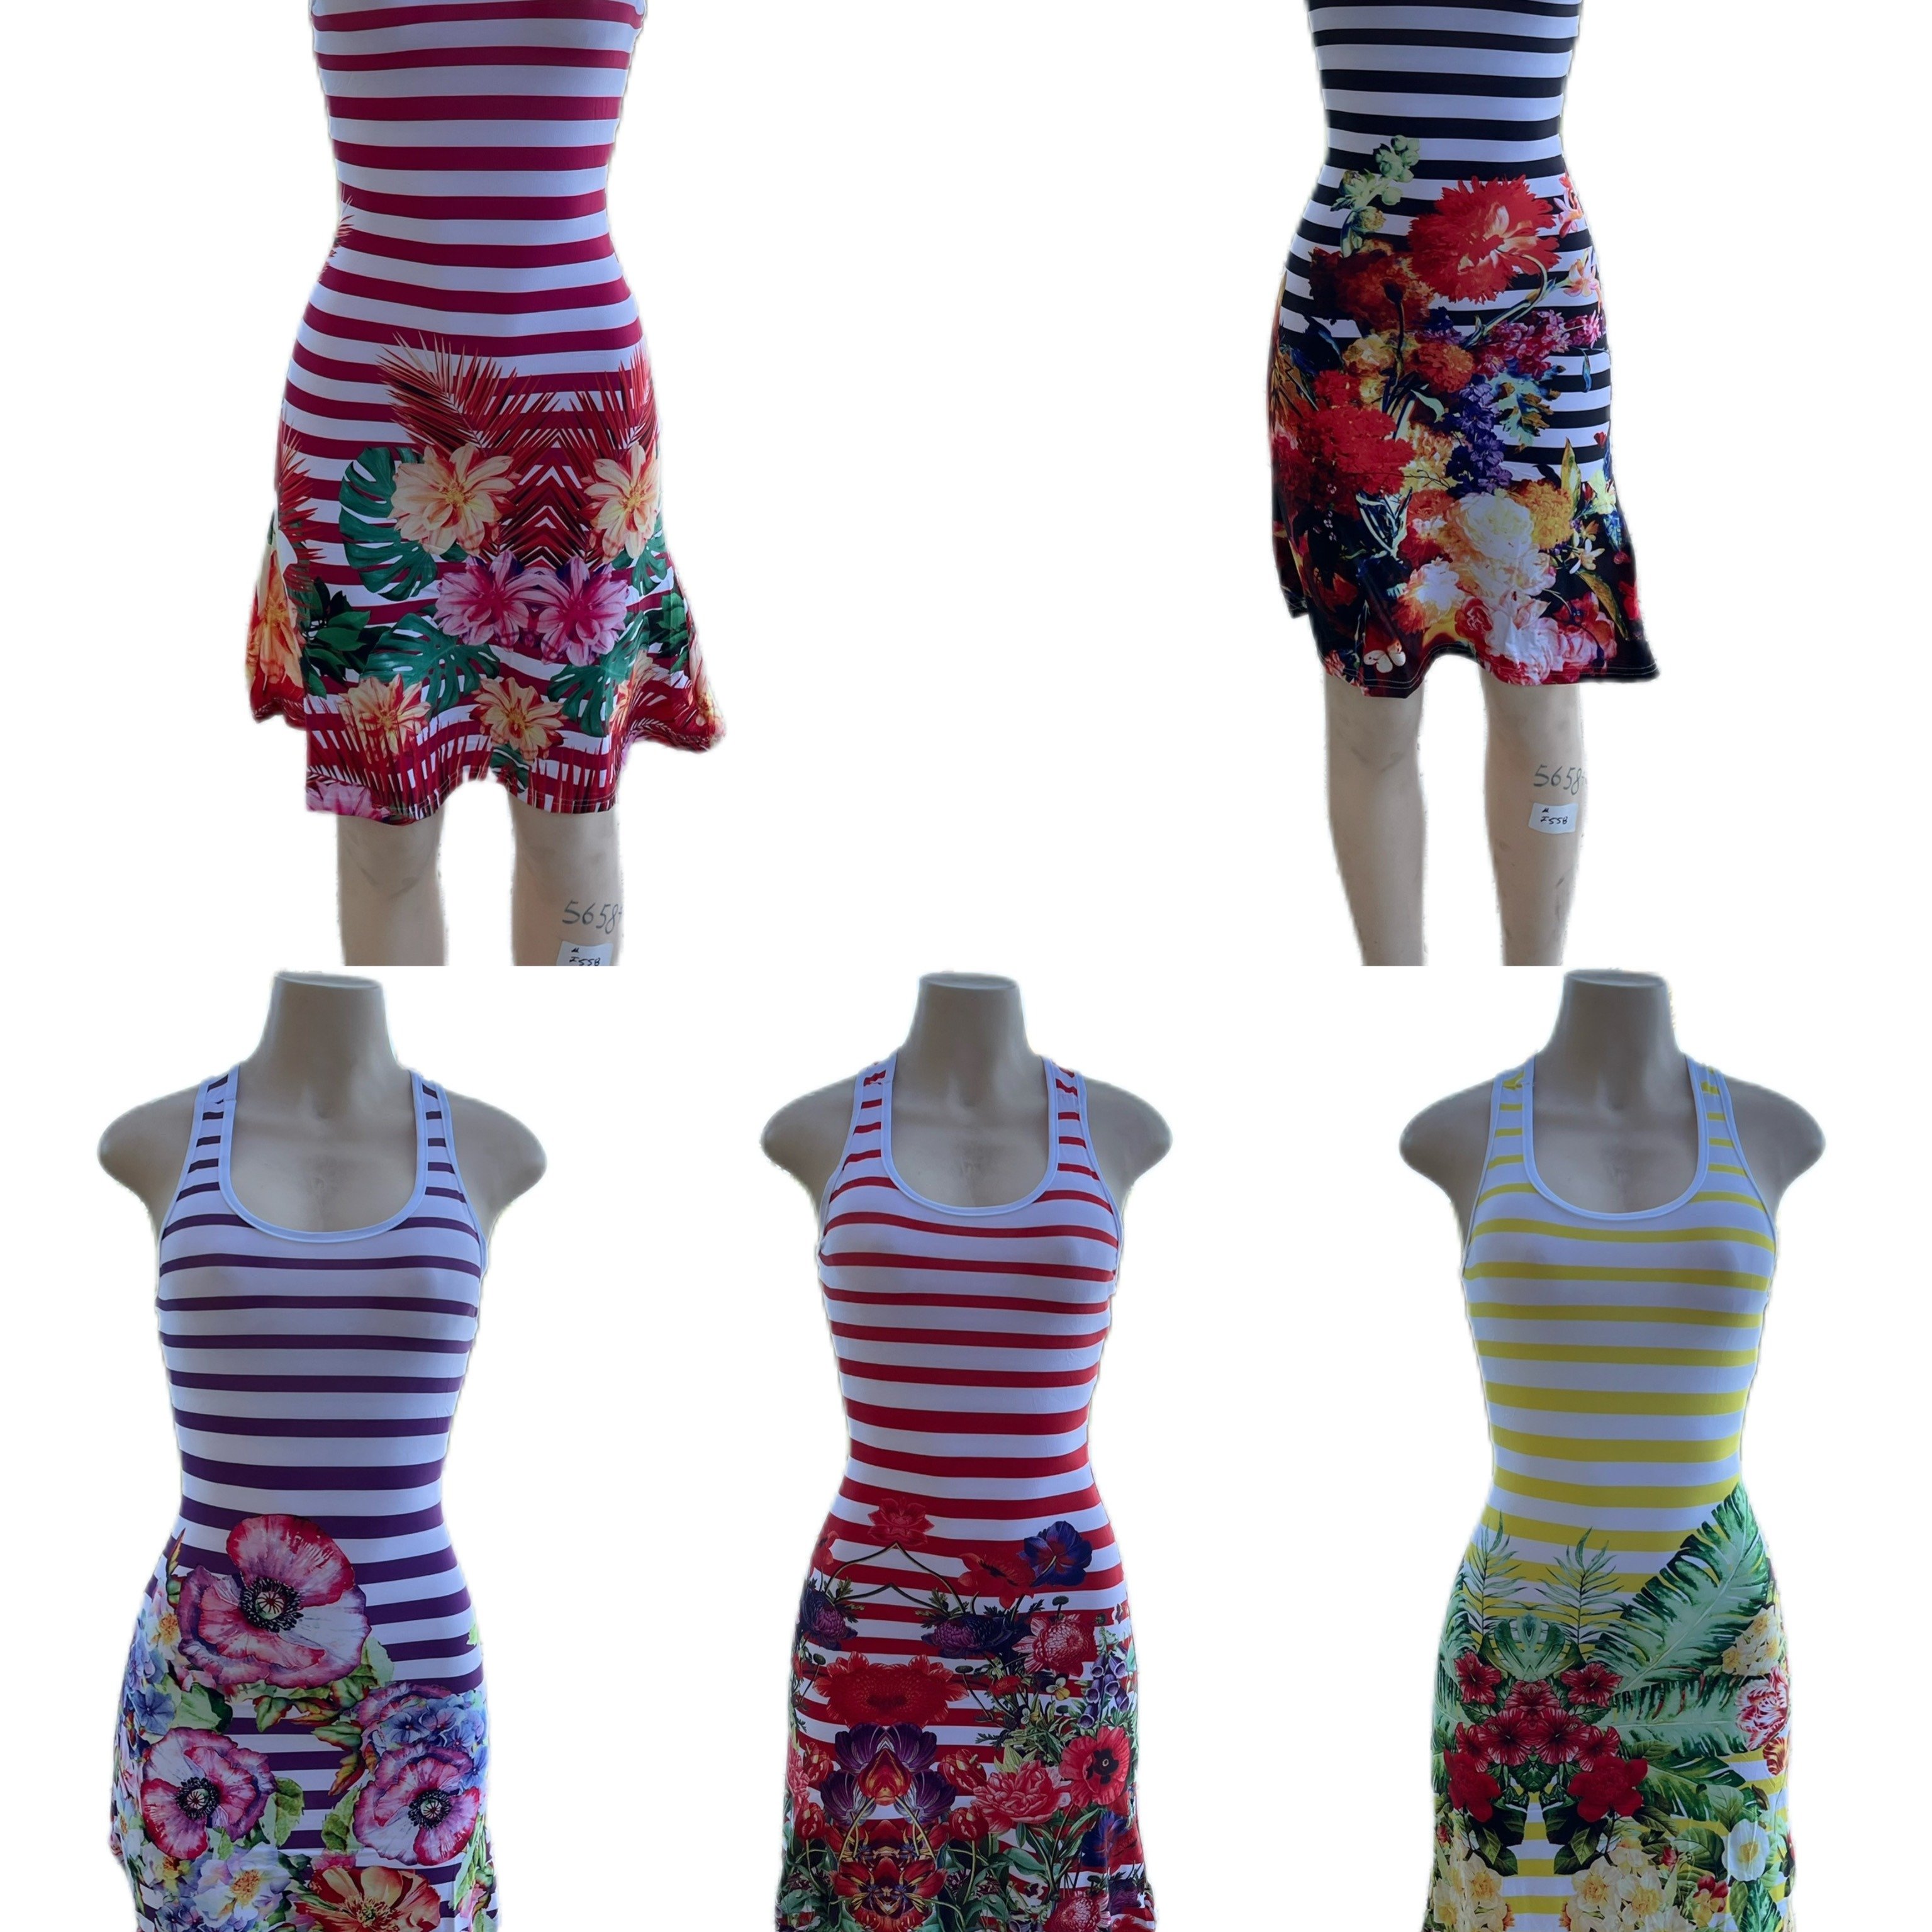 

W558 Womens Charming Stripe & Floral Print Dress - Casual Round Neck